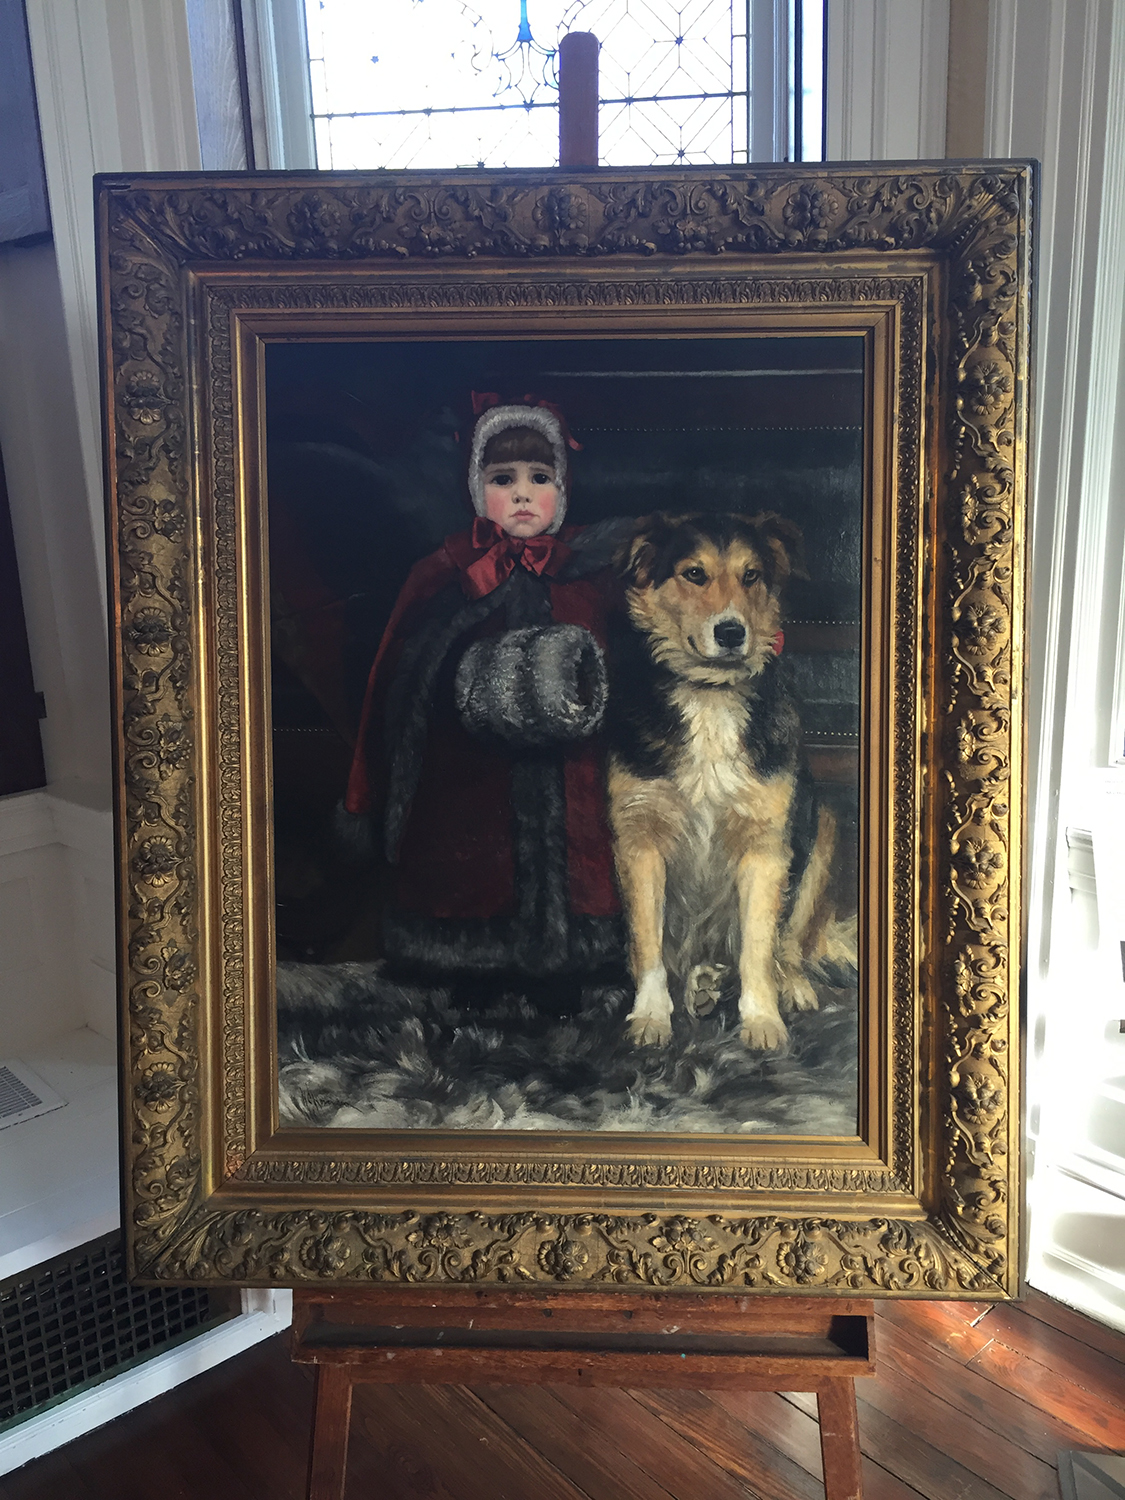 Martha Hovenden and Her Dog, by Helen Corson Hovenden